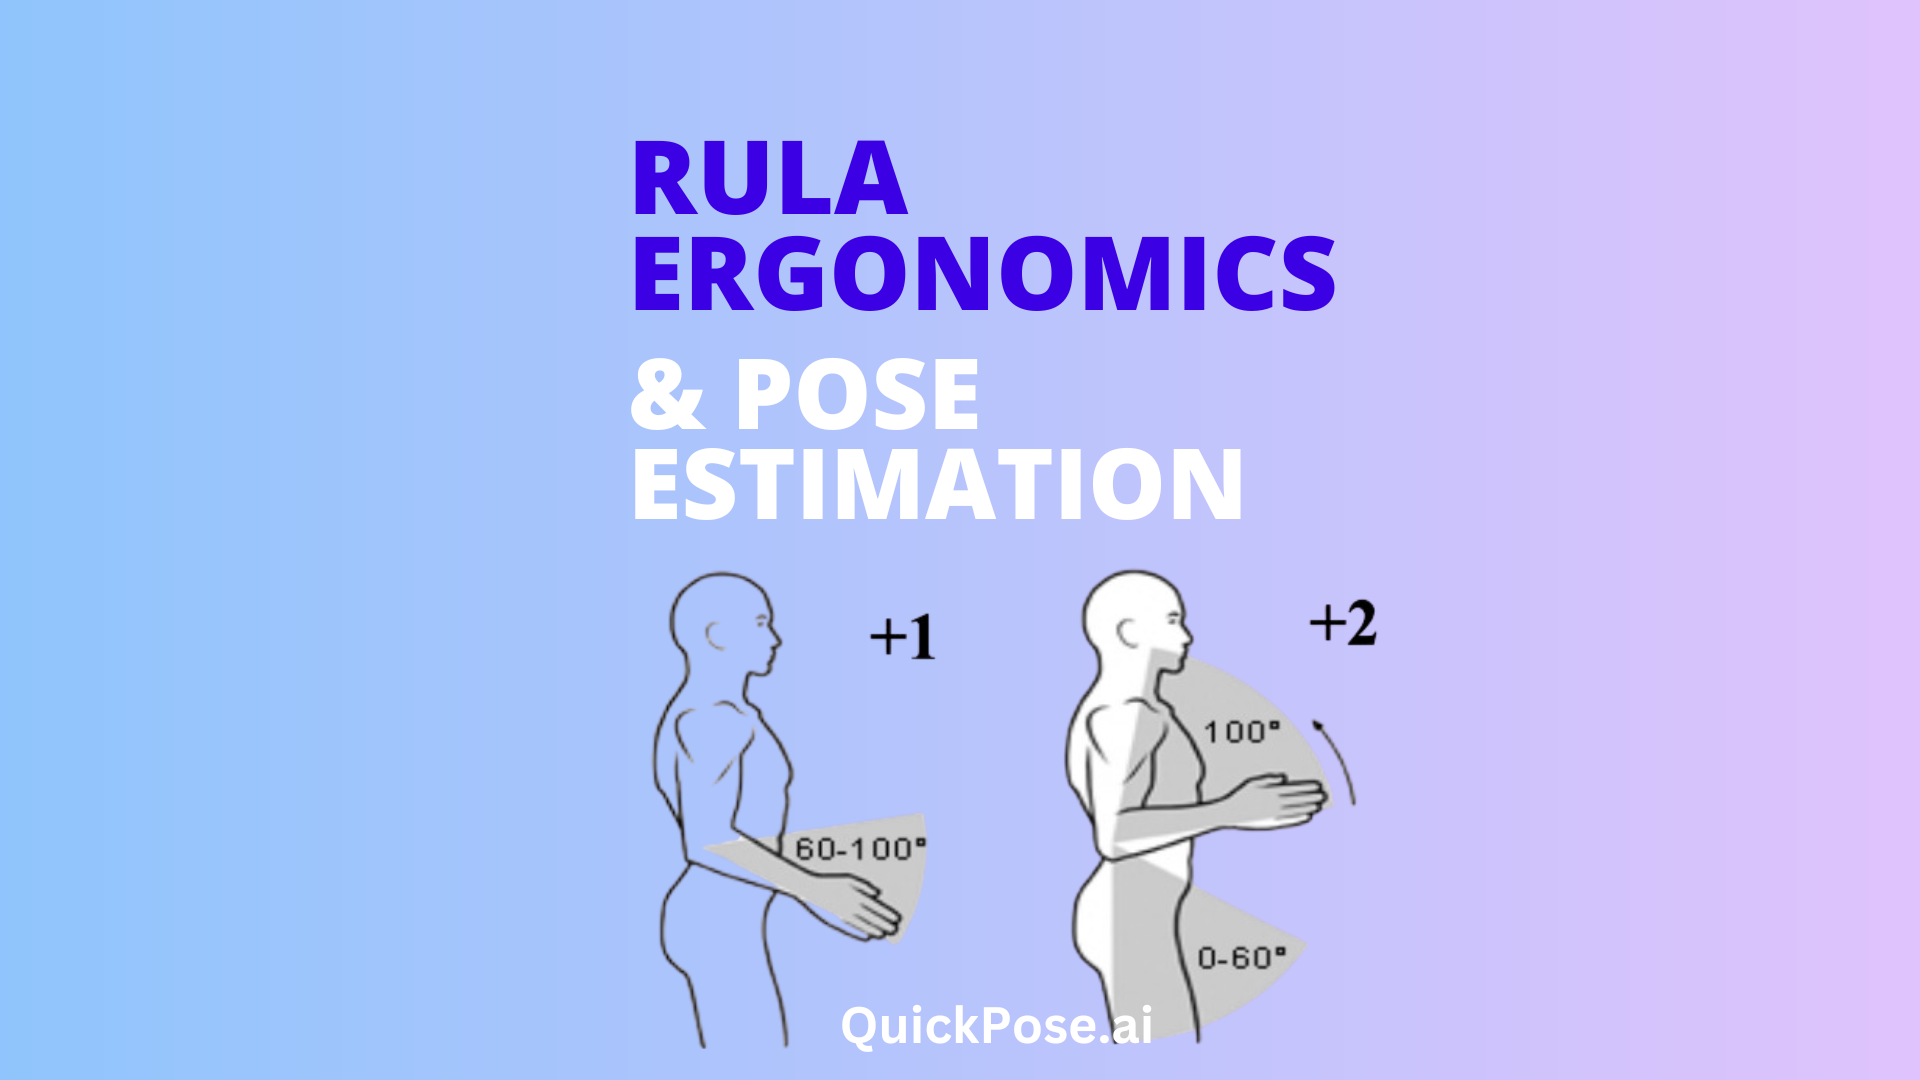 Text in Image reads RULA Ergonomics and Pose Estimation. There is an image of a person and the joint angles highlighted from the RULA framework.